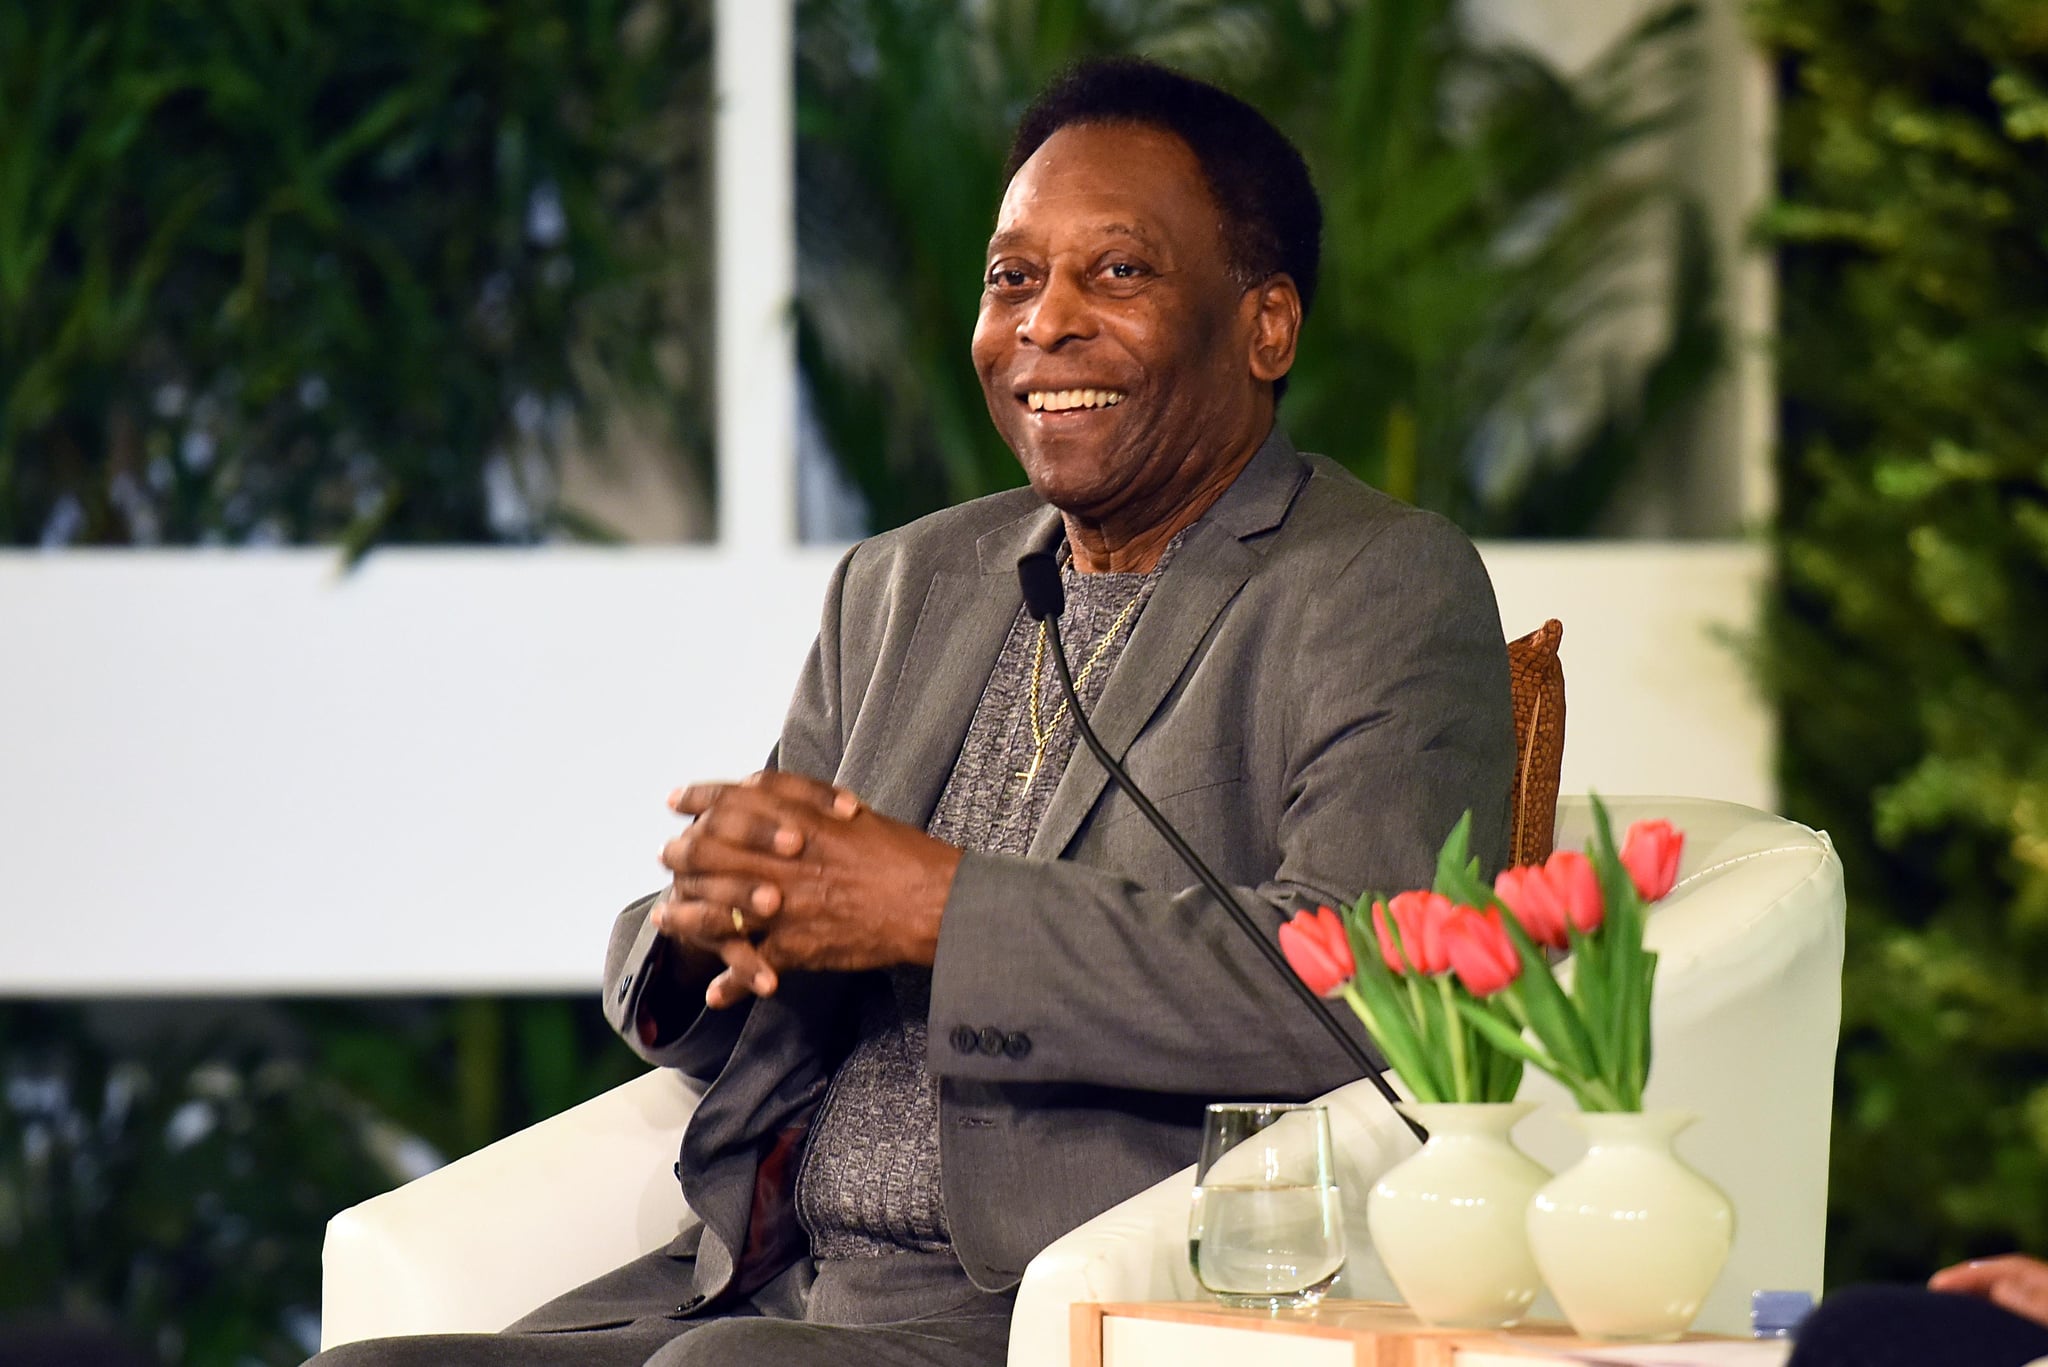 NEW DELHI, INDIA - OCTOBER 5: (EDITOR'S NOTE: This is an exclusive image of Hindustan Times) Legendary Brazilian footballer Pele during a first day of Hindustan Times Leadership Summit (HTLS) 2018 at Taj Palace, on October 5, 2018 in New Delhi, India. (Photo by Amal KS/Hindustan Times via Getty Images)